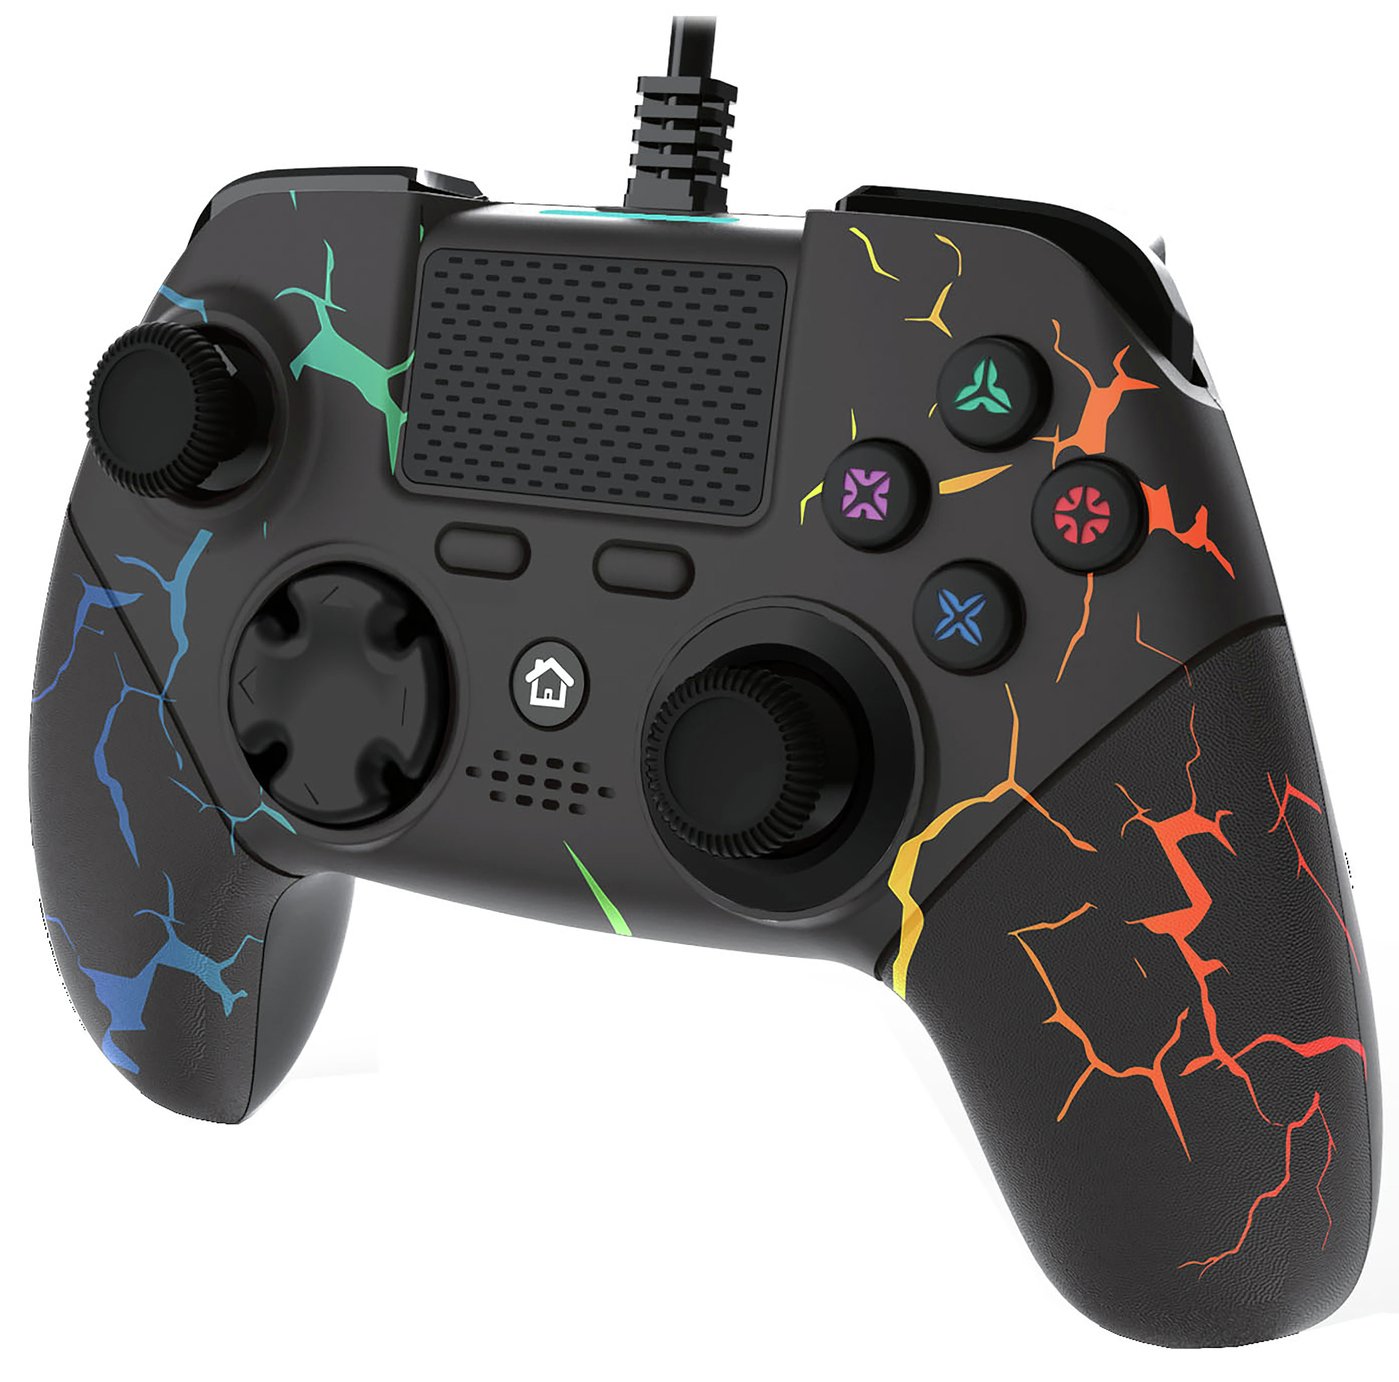 Neo Storm PS4 Wired Controller Review